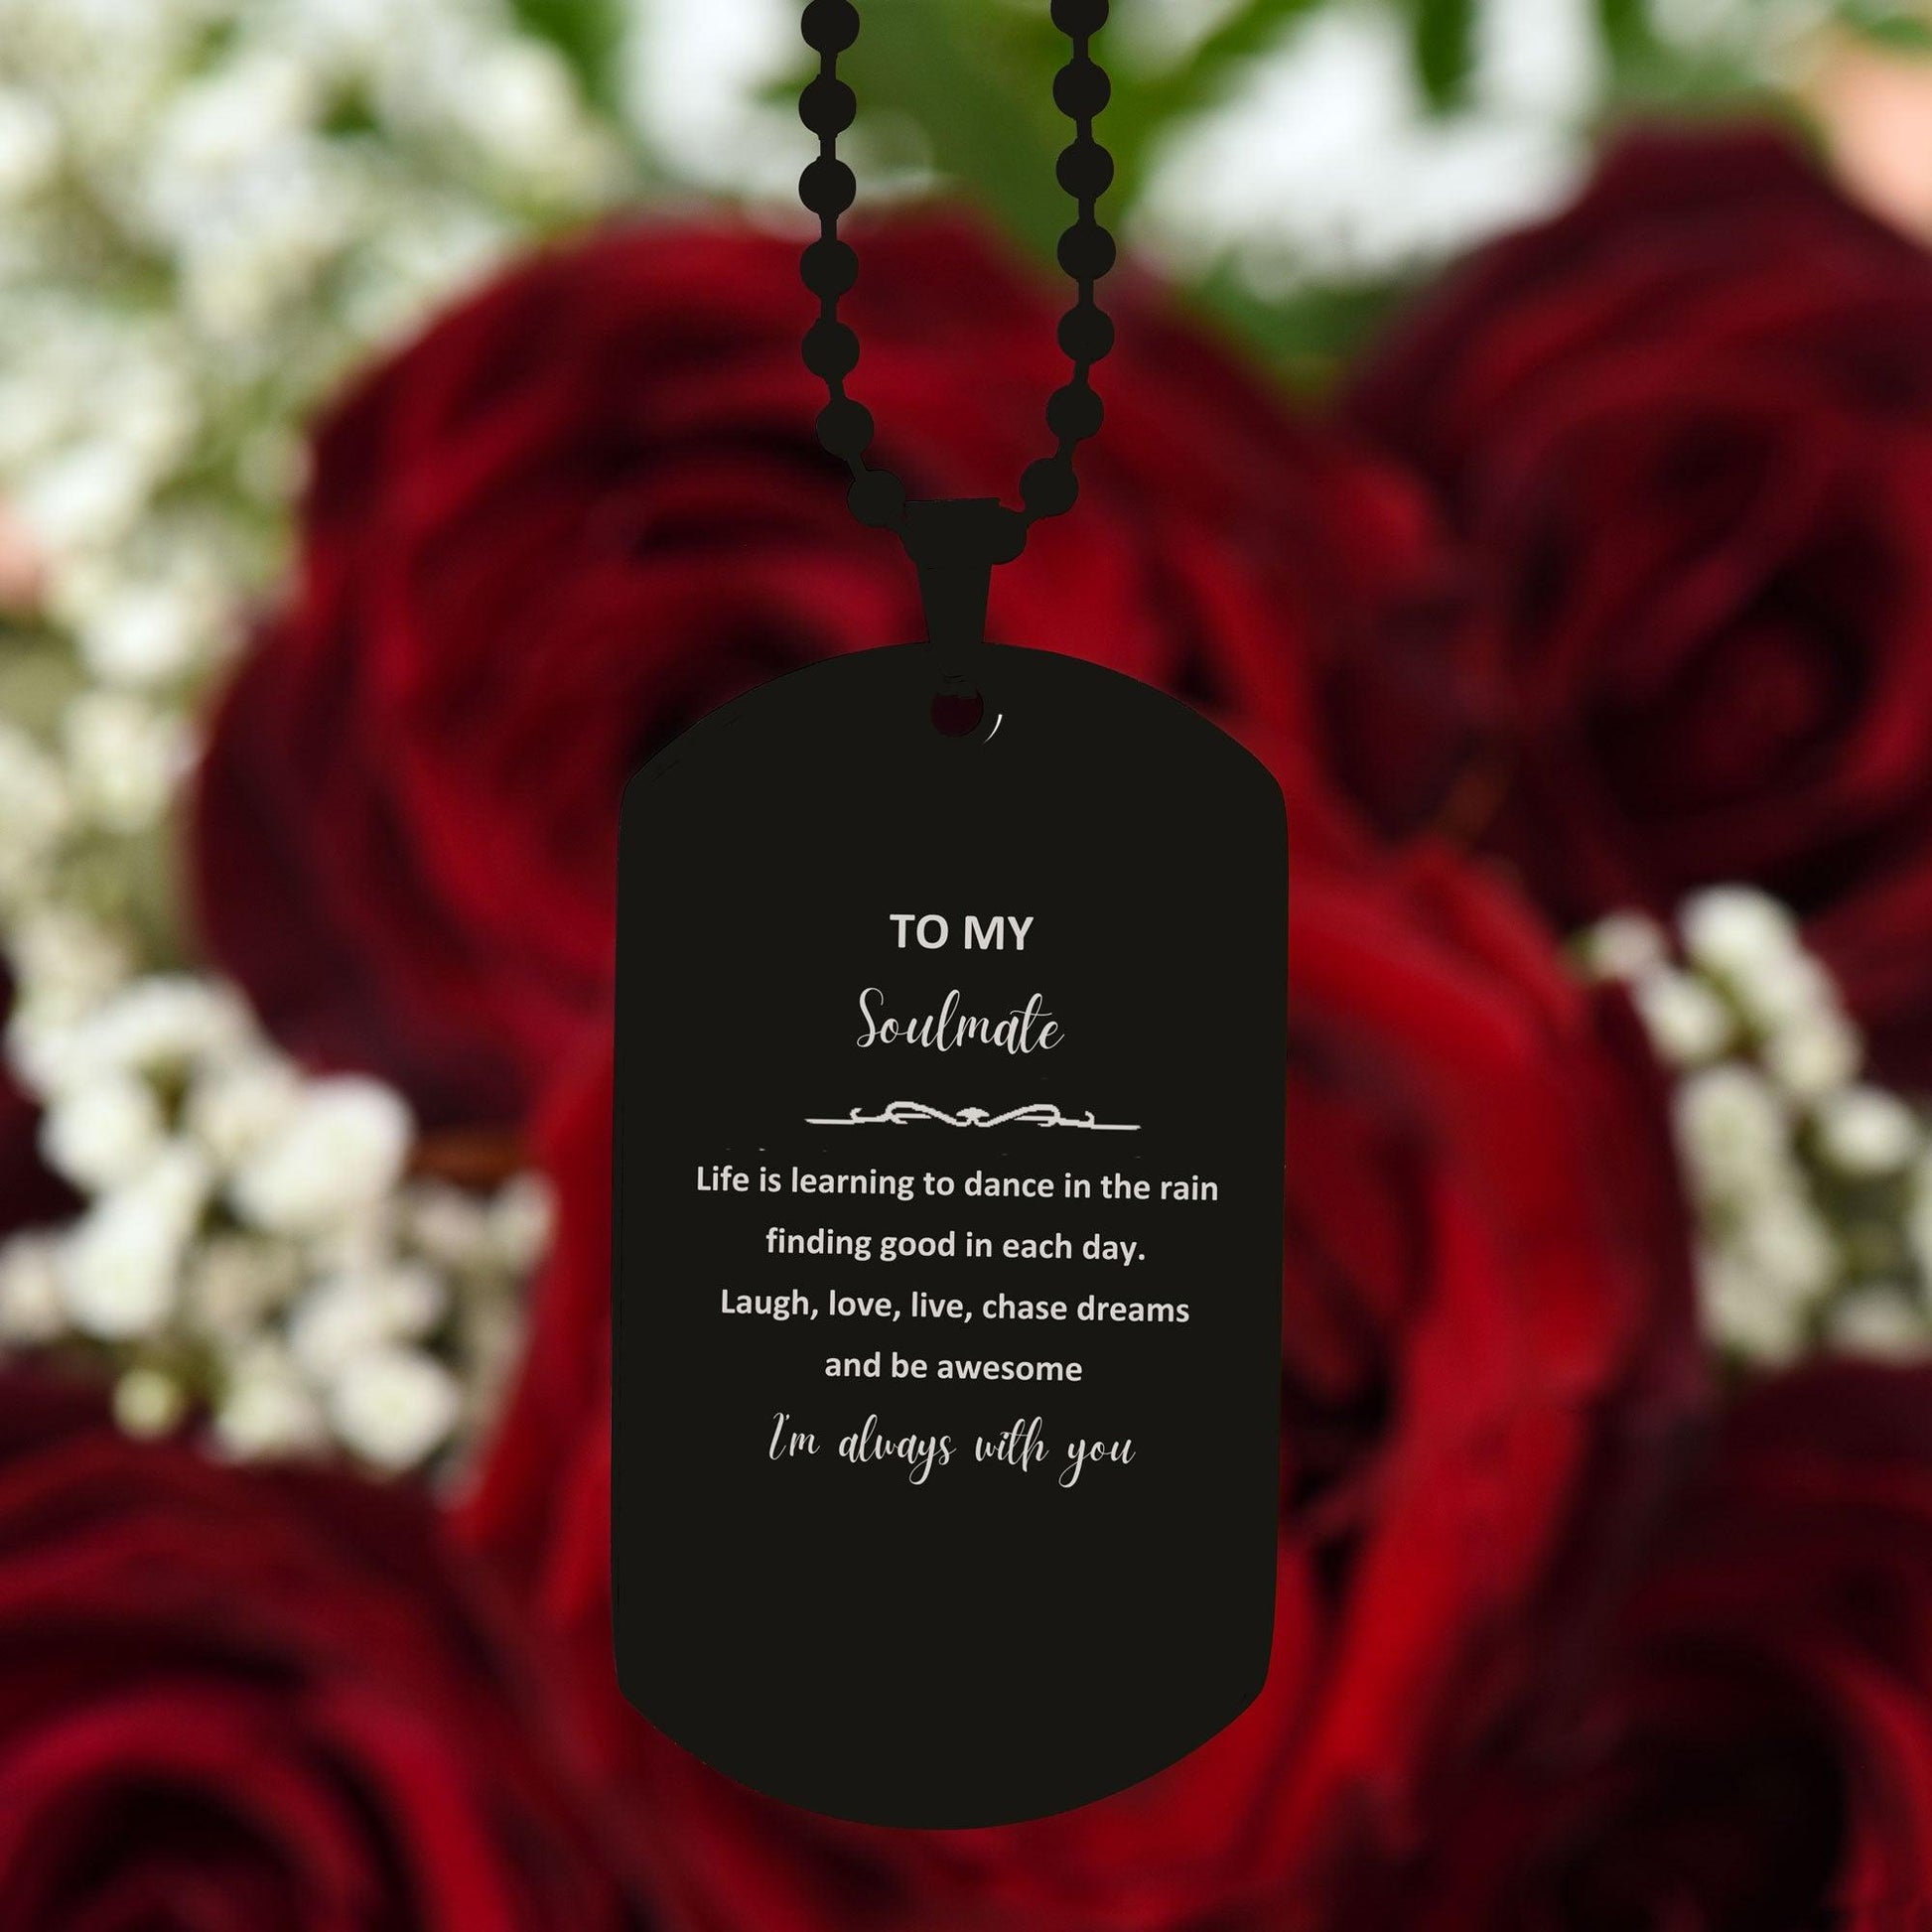 Heartfelt Soulmate Engraved Black Dog Tag Necklace - Life is Learning to Dance in the Rain, I'm always with you - Birthday, Christmas Holiday Gifts - Mallard Moon Gift Shop